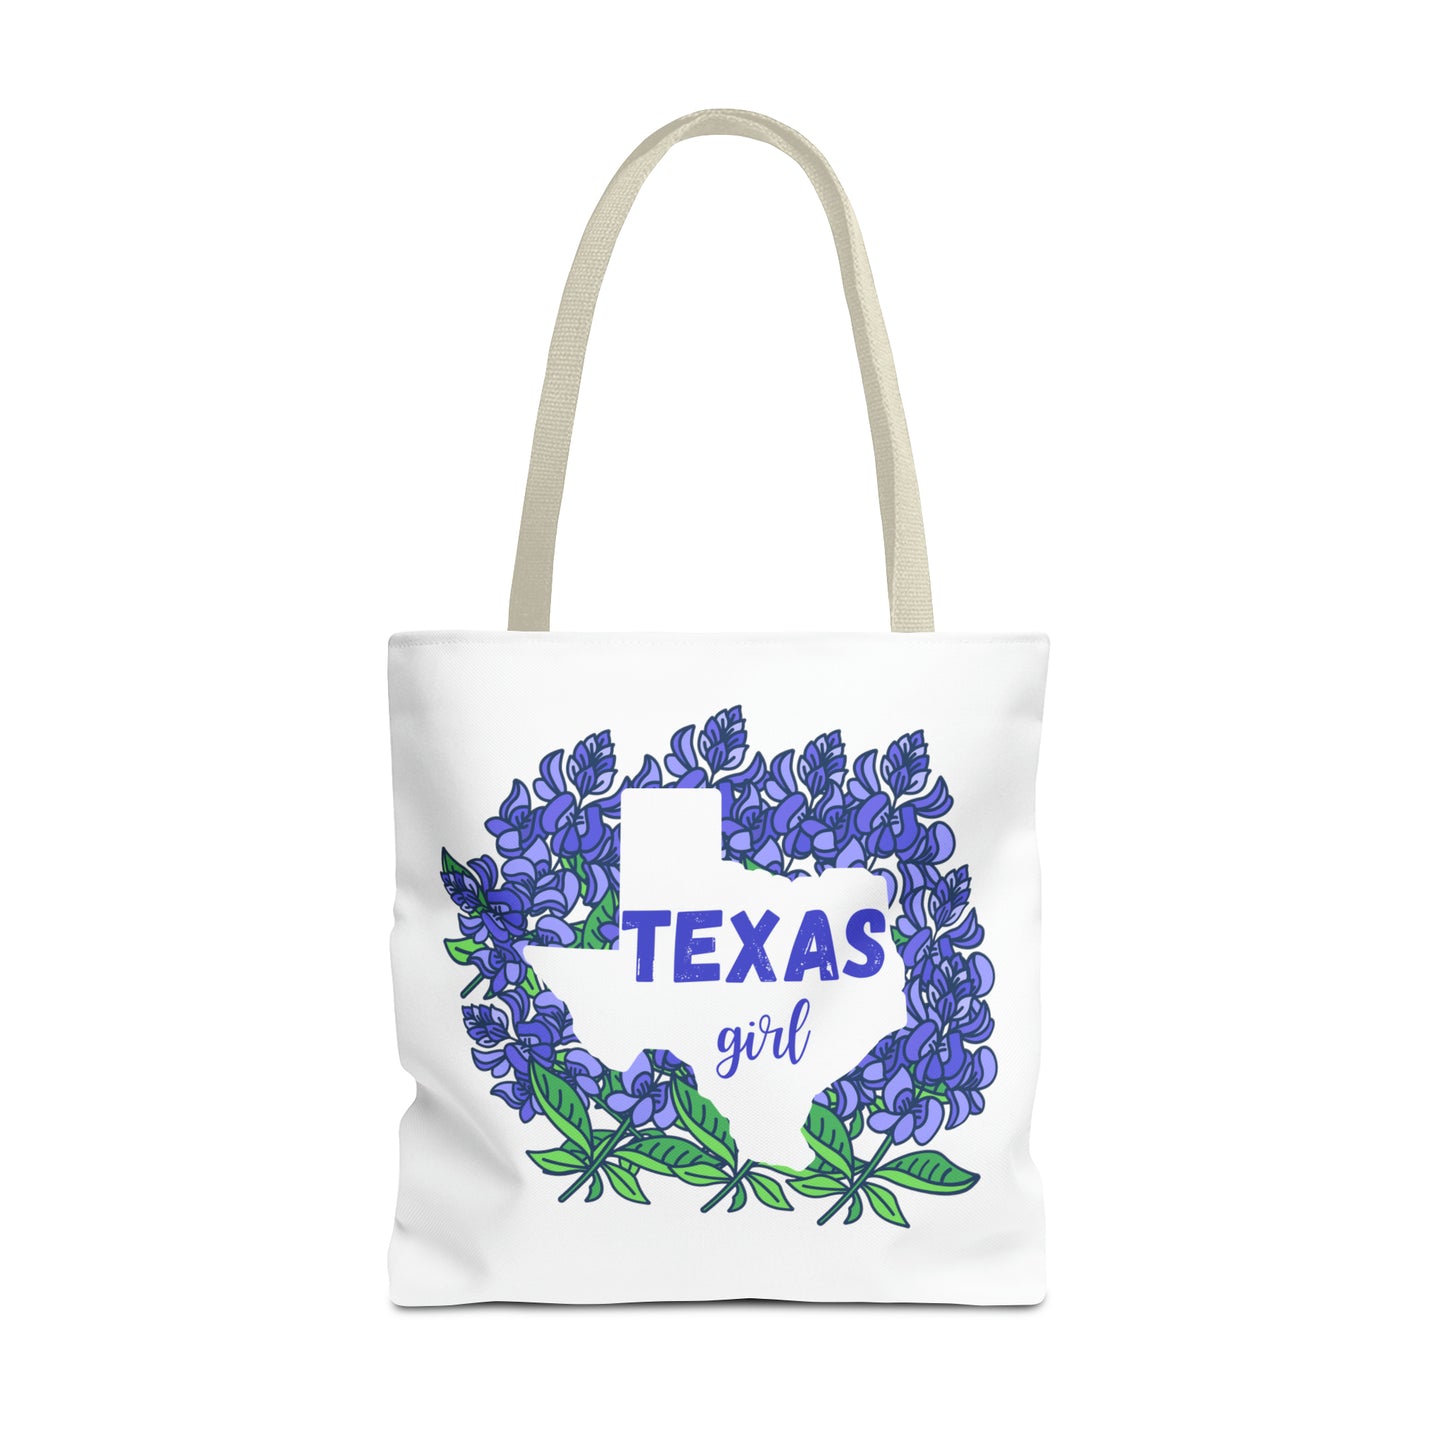 Texas Girl Bluebonnet Tote Bag, Texas Tote Bag, Book Bag, Grocery Bag, Travel Bag, Gifts For Her, Gifts For Mom, Teacher Gift, Friend Gift